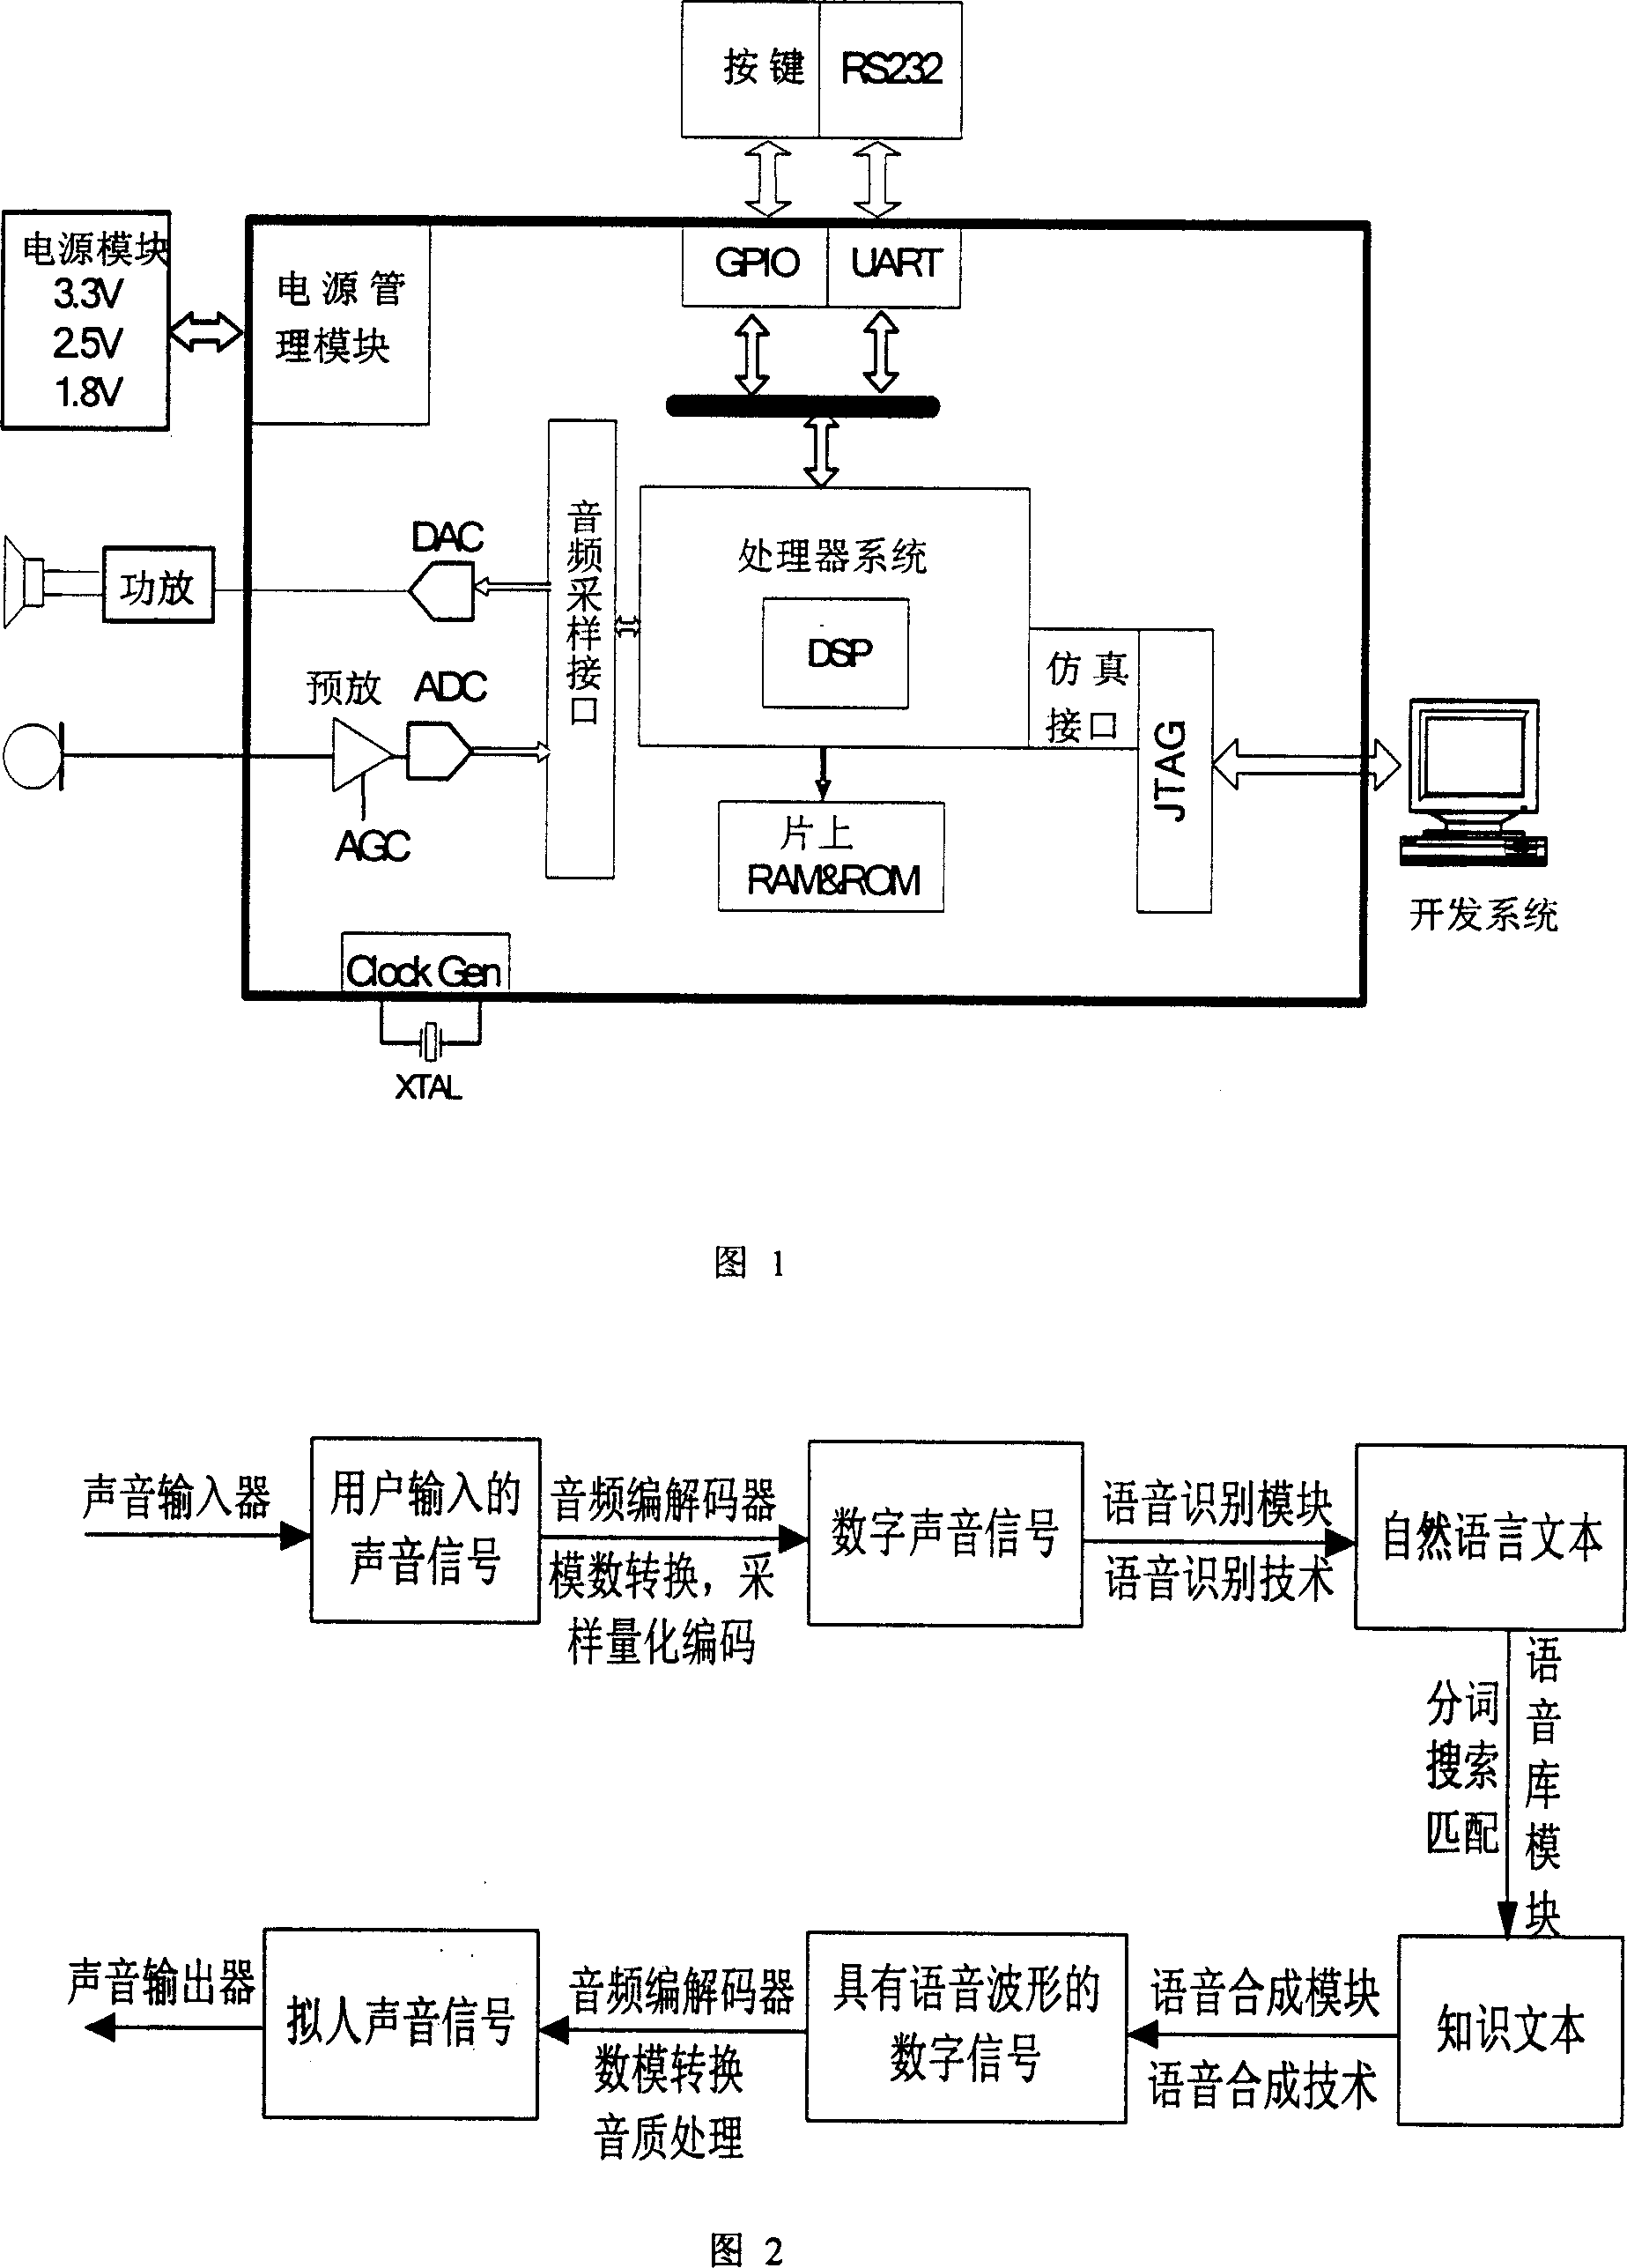 Embedded voice interaction device and interaction method thereof